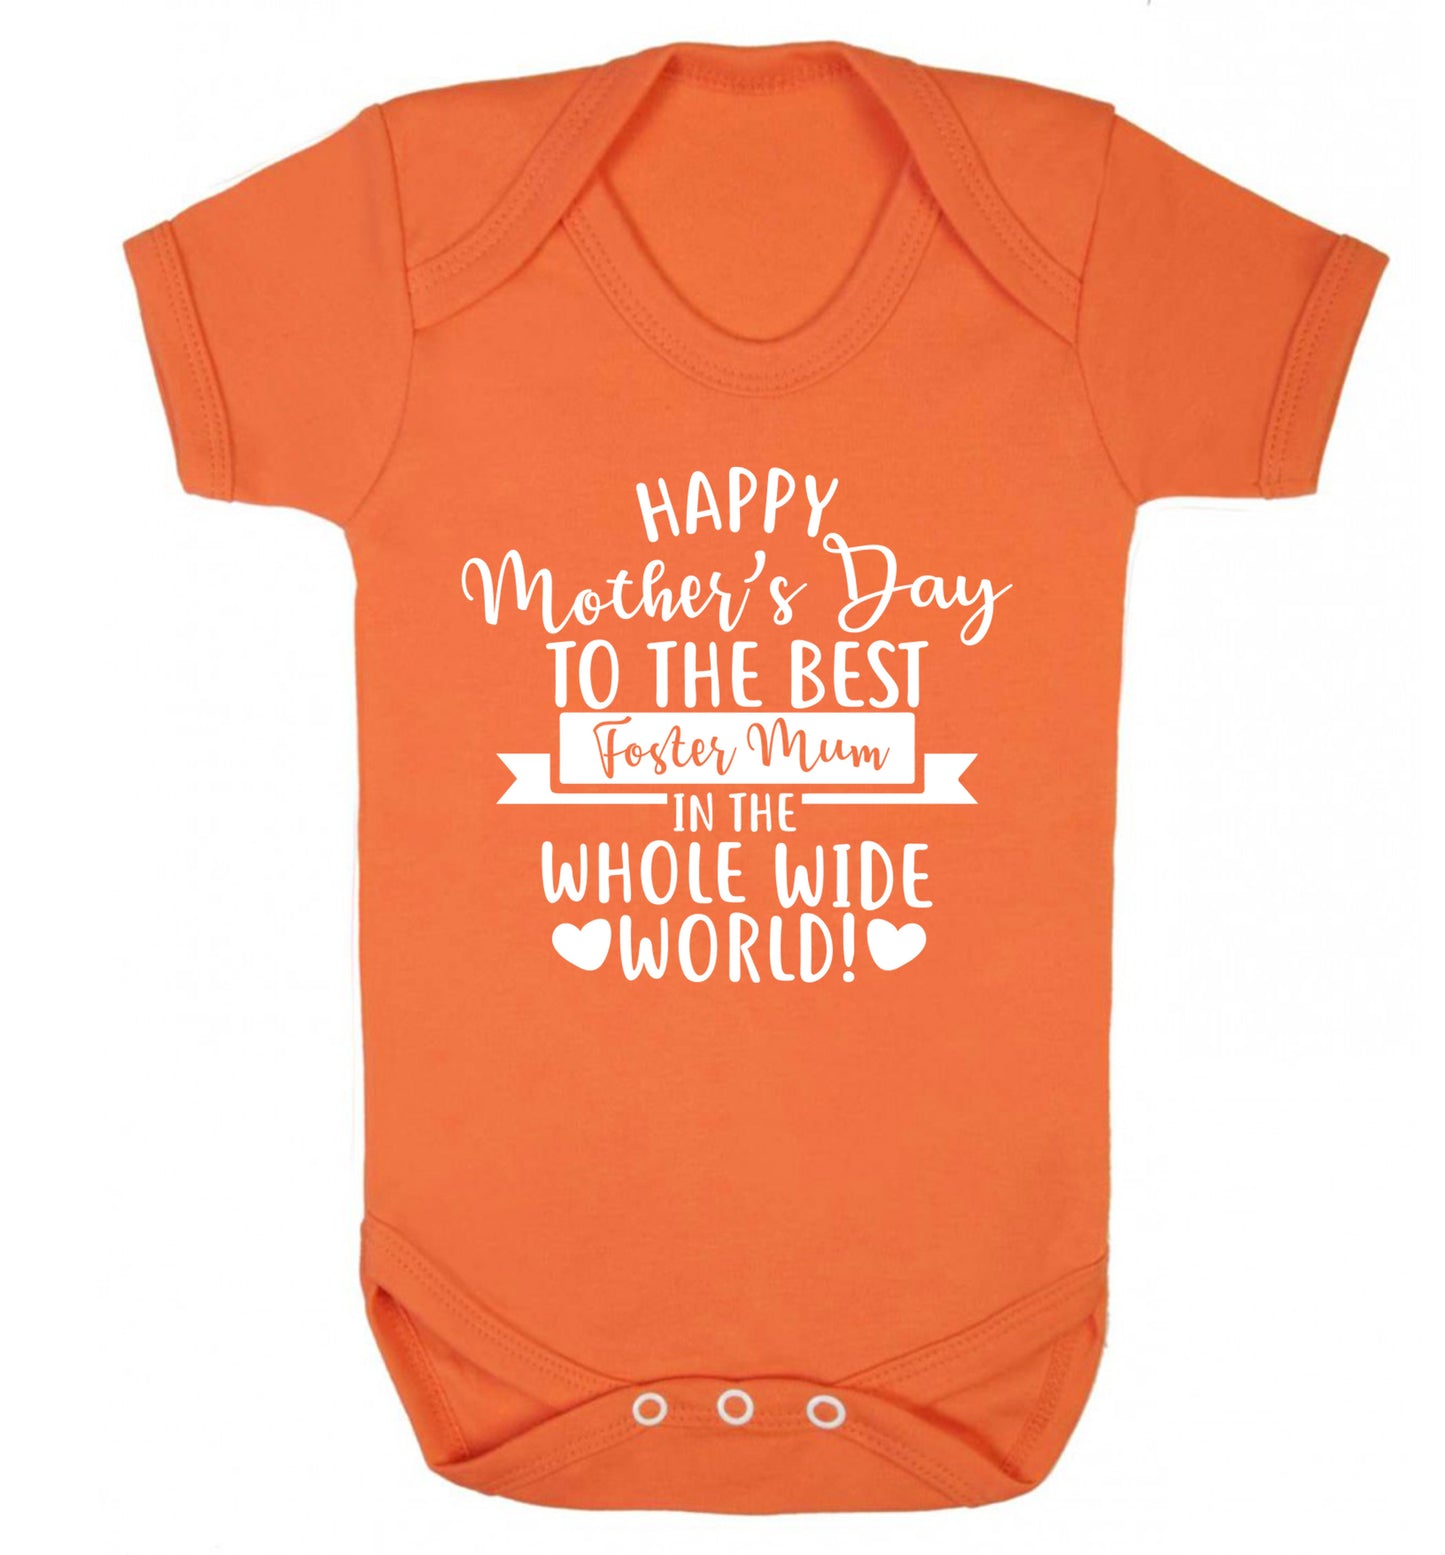 Happy mother's day to the best foster mum in the world Baby Vest orange 18-24 months